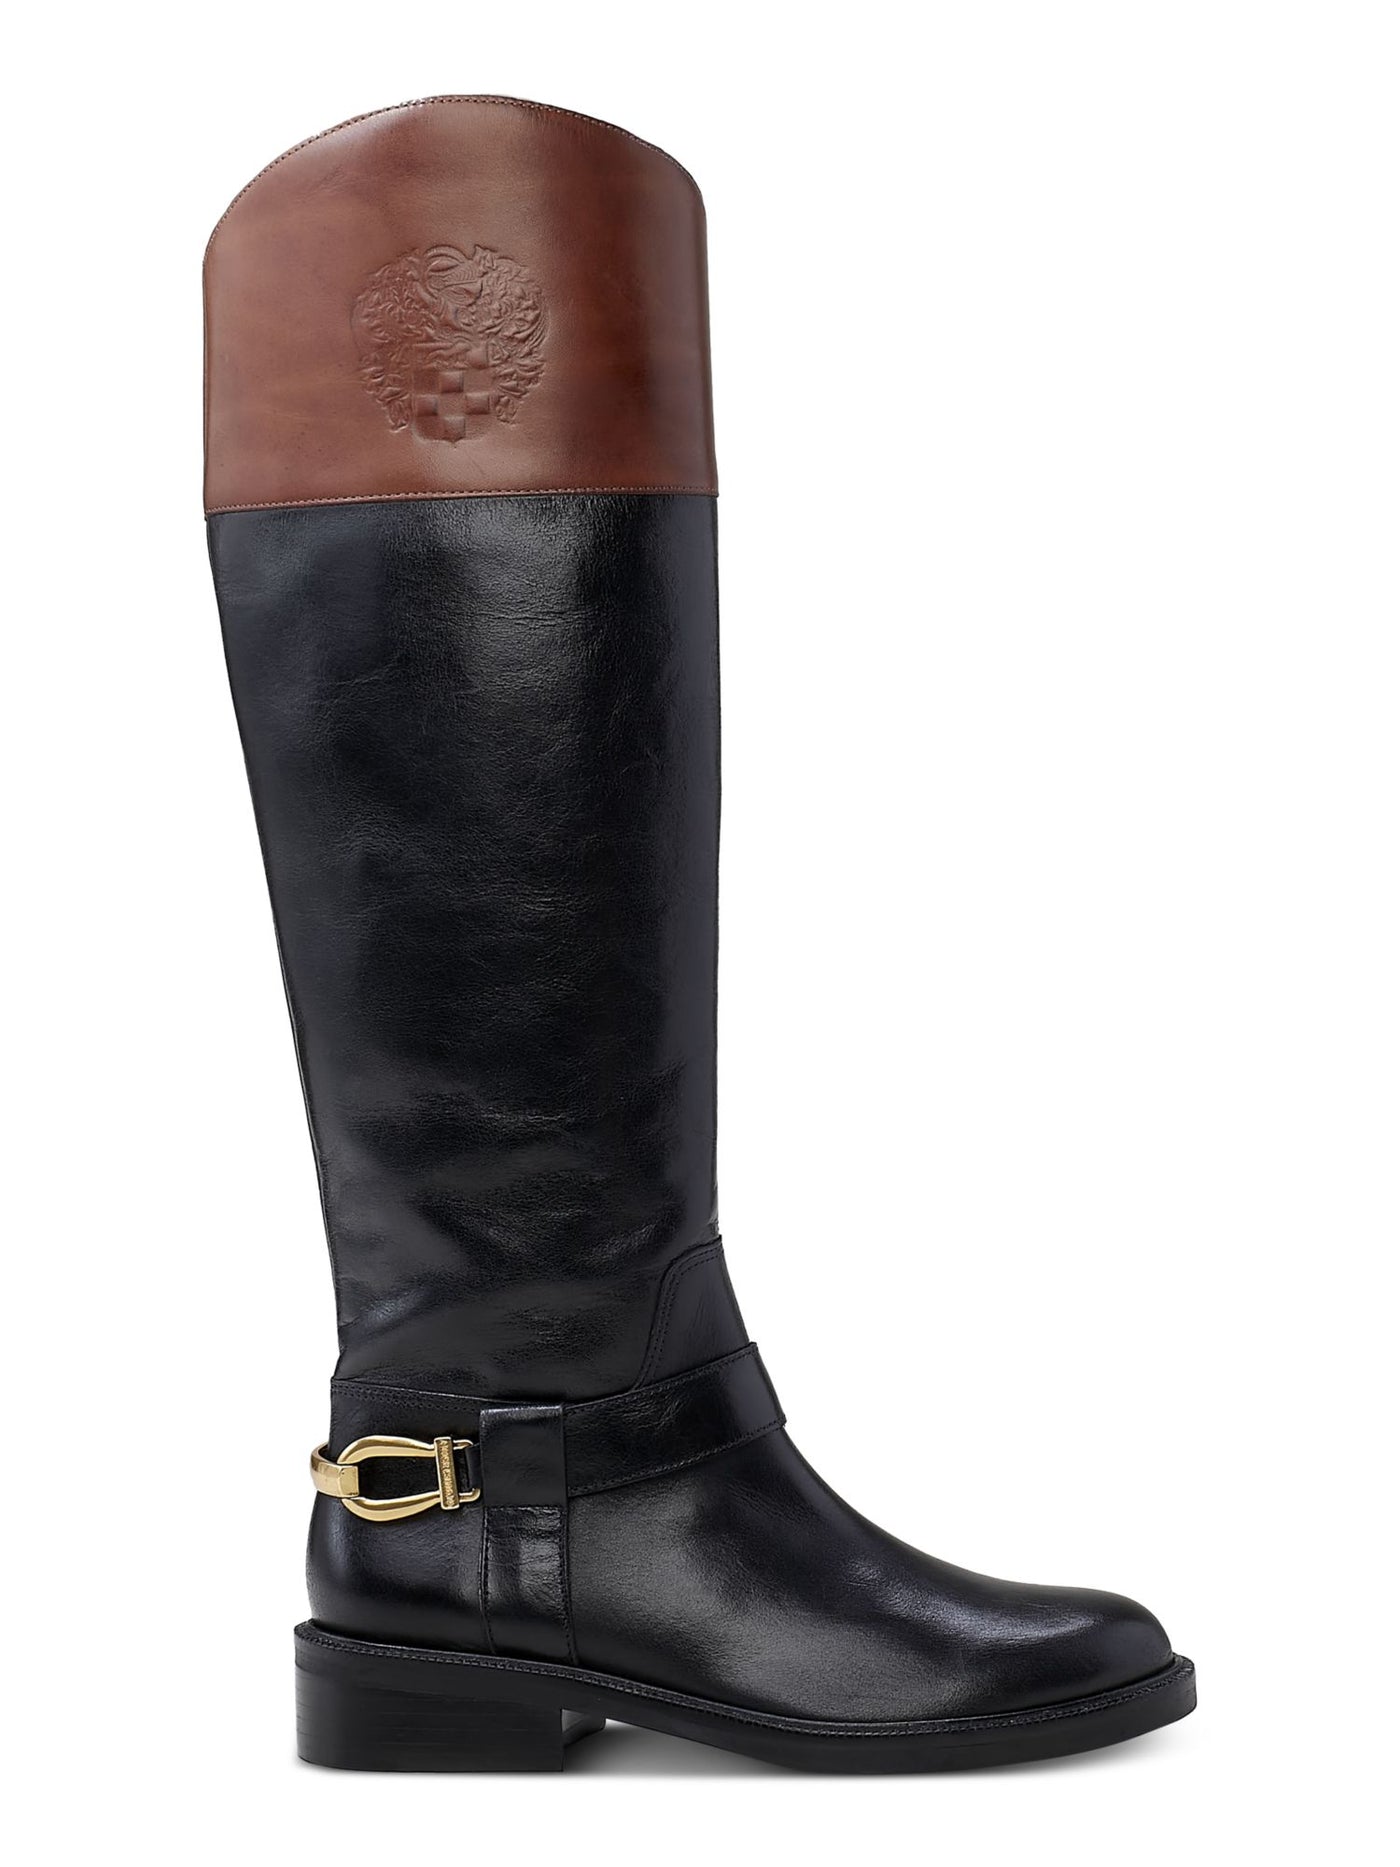 VINCE CAMUTO Womens Black Color Block Ankle Strap With Gold-Tone Hardware Goring Padded Amanyir Almond Toe Block Heel Zip-Up Leather Riding Boot 6.5 M